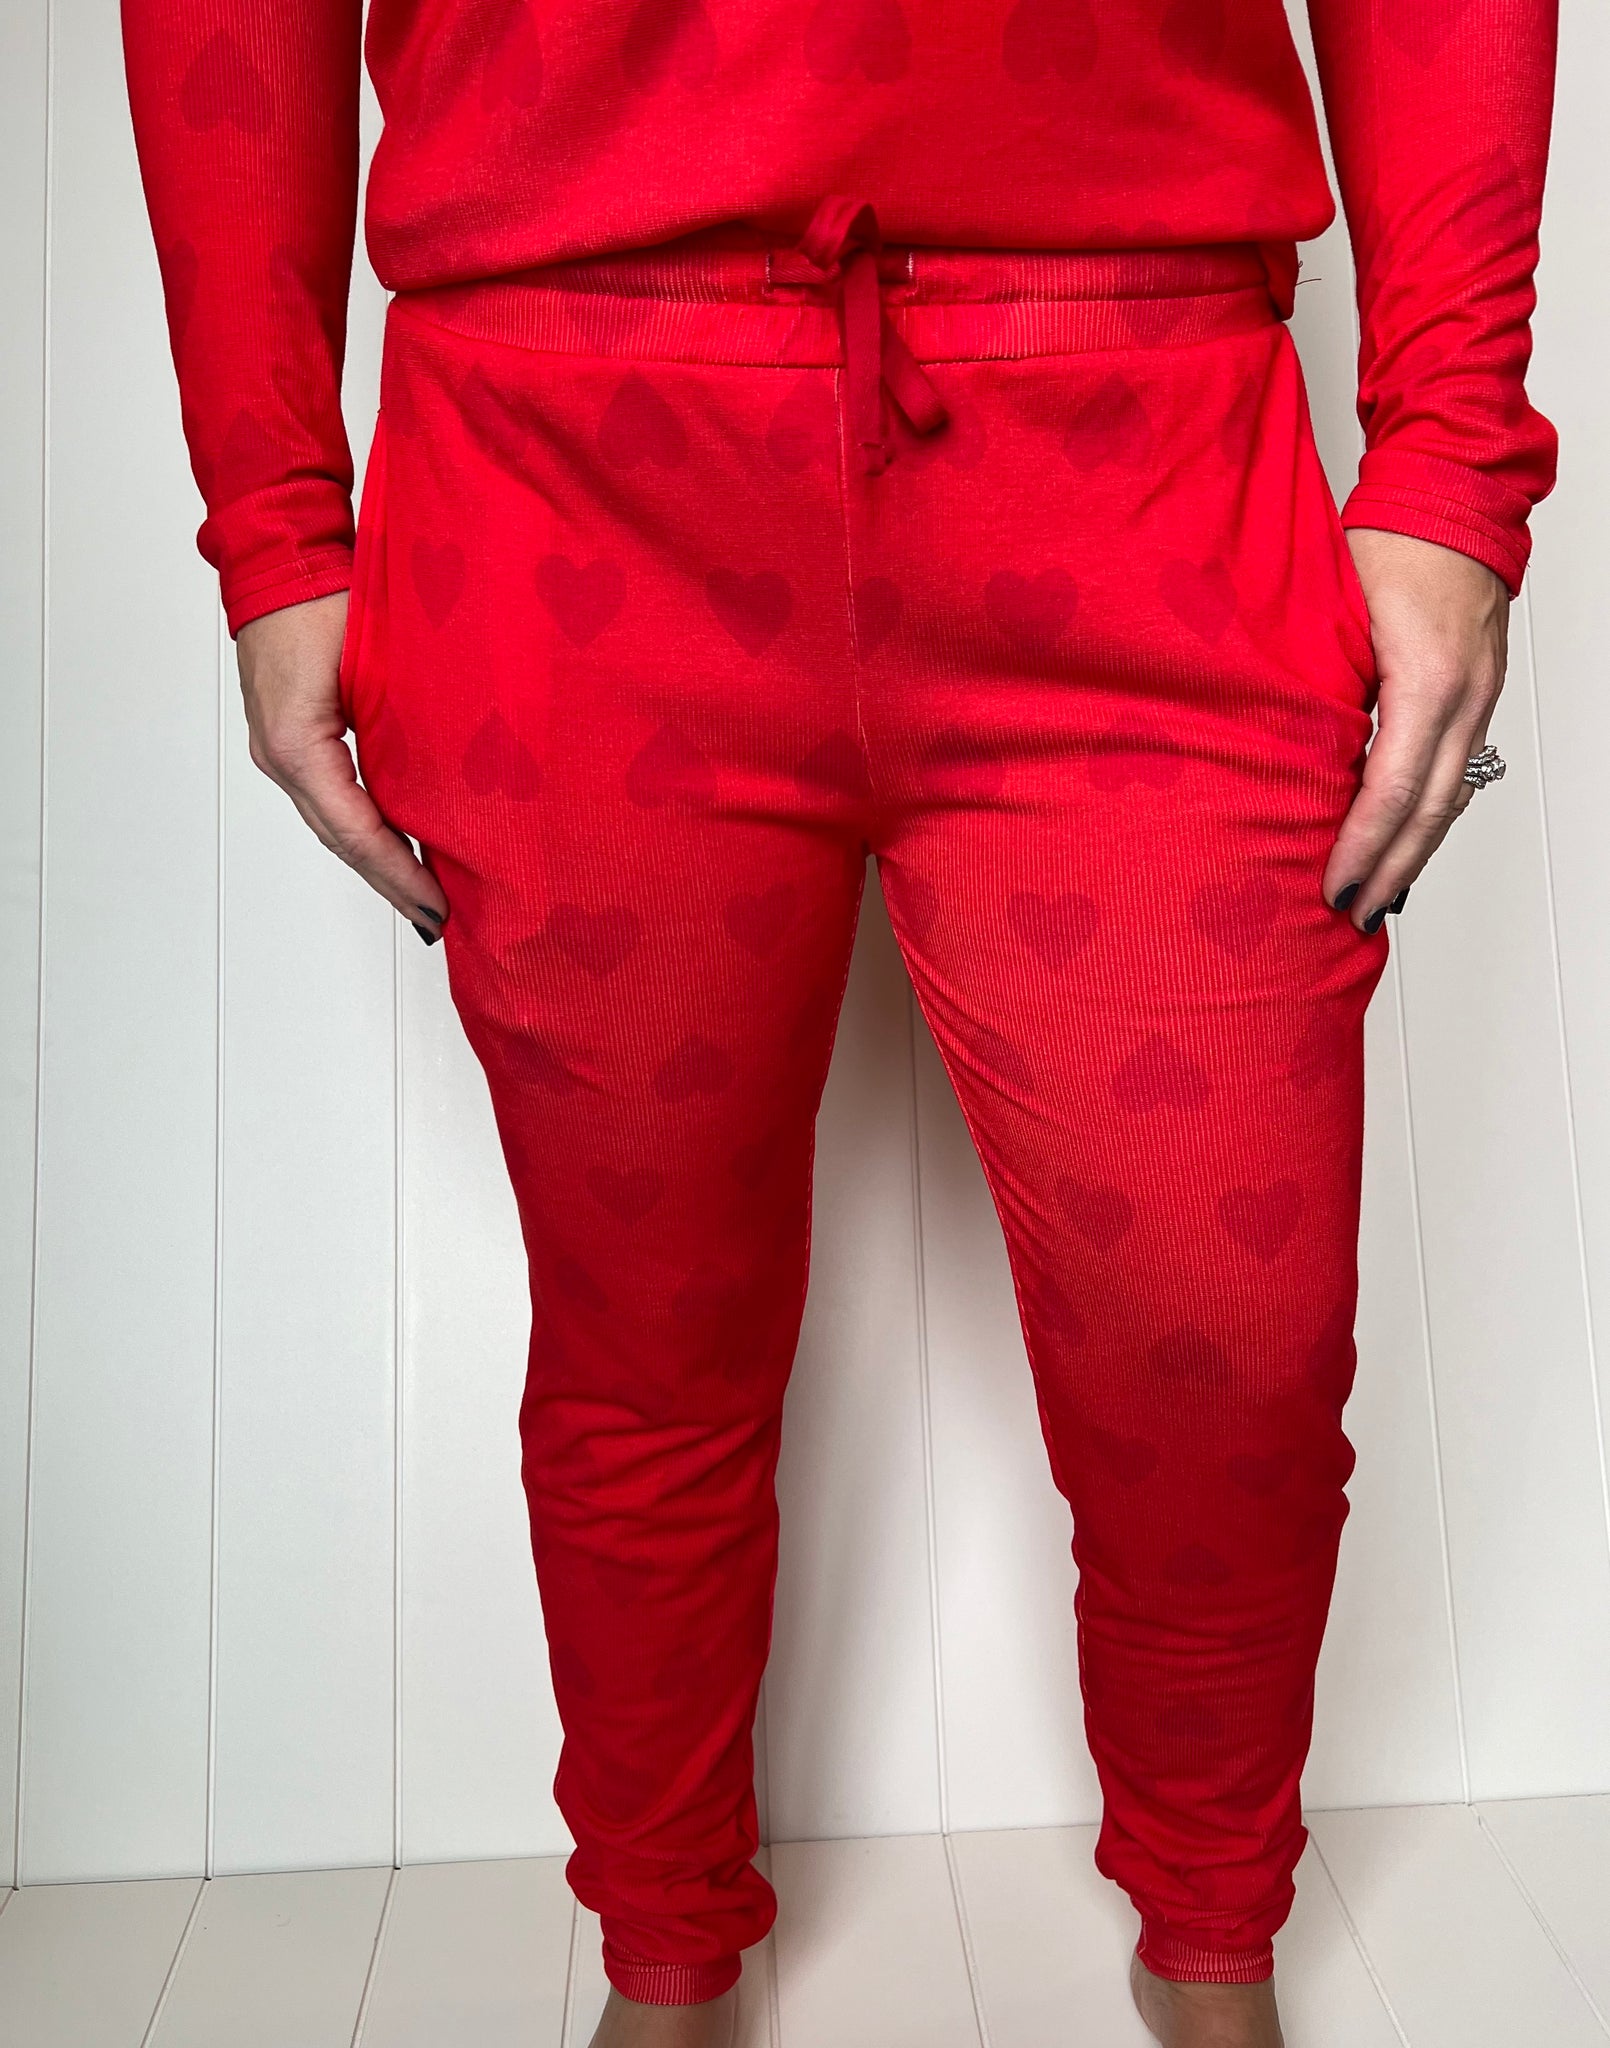 Ribbed Red Hearts Adult Women's (unisex) Joggers